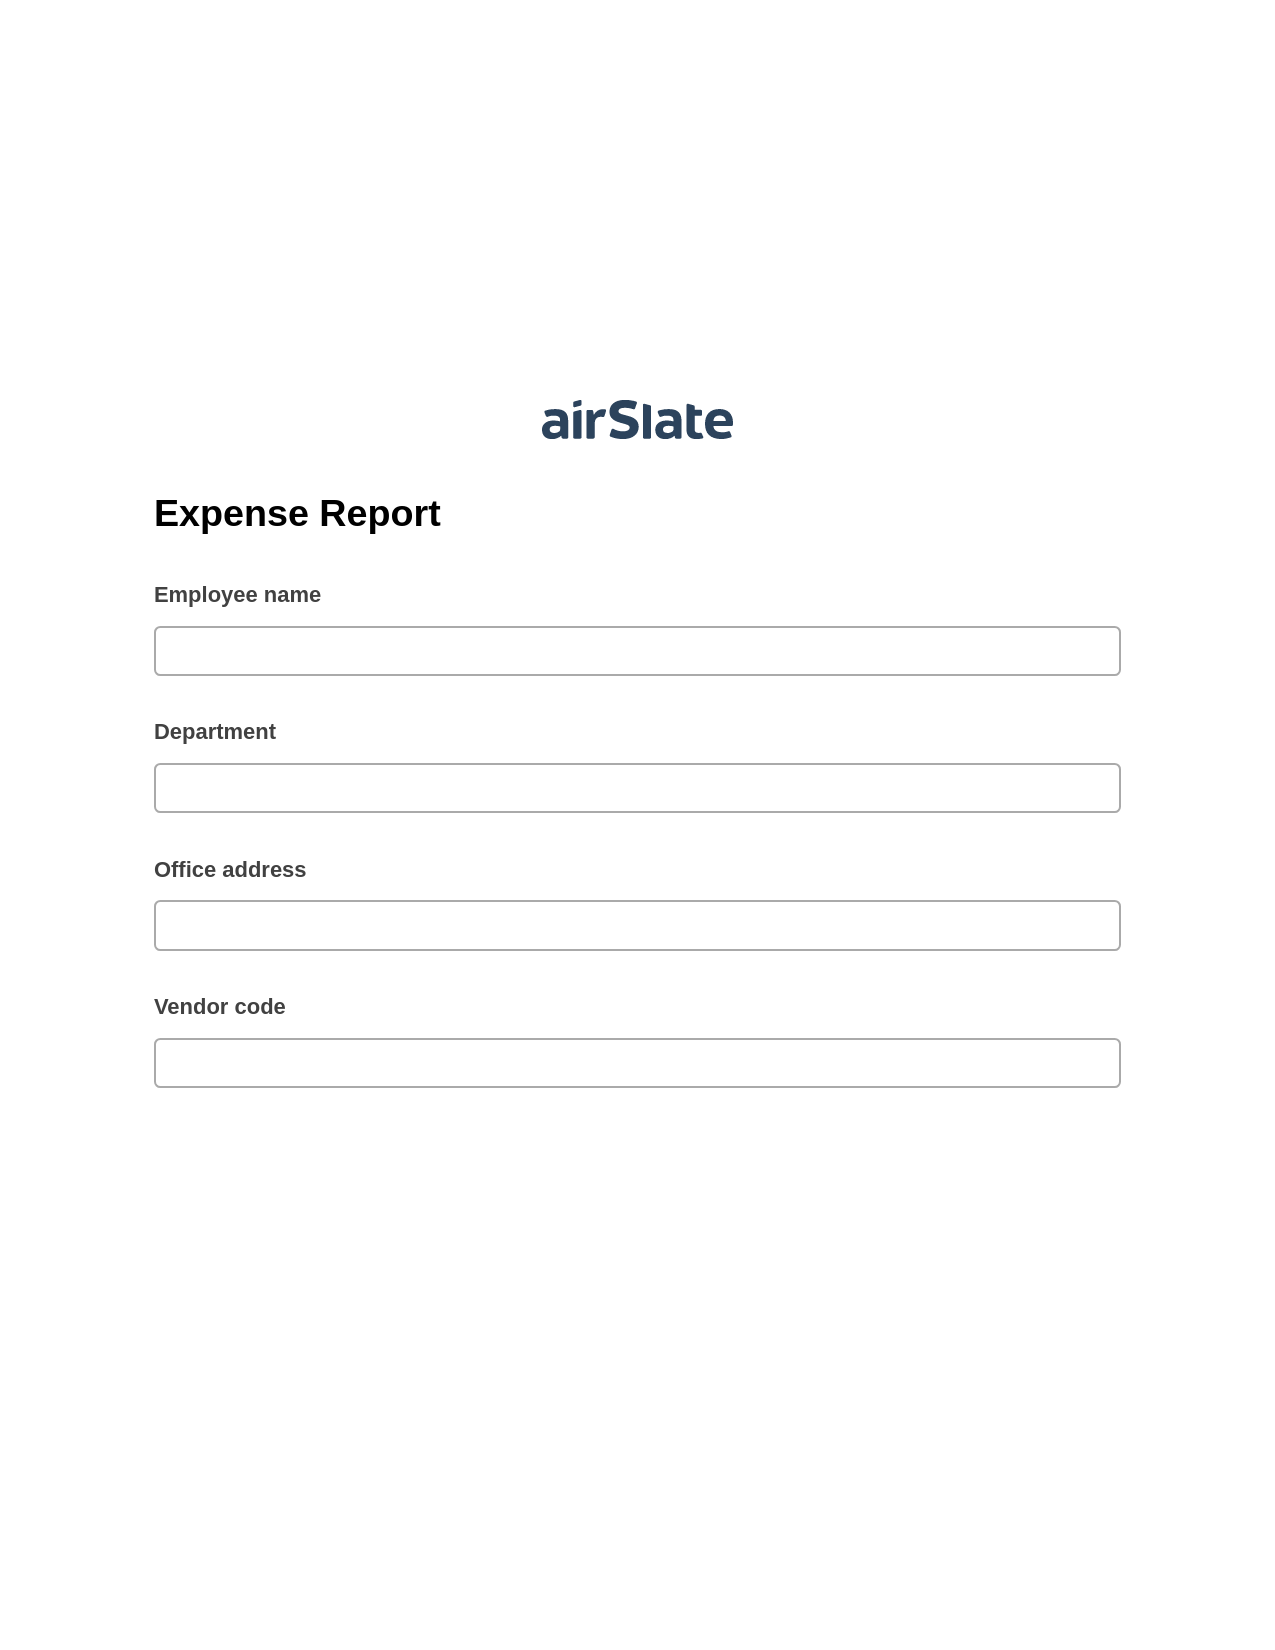 Expense Report Pre-fill from CSV File Bot, Create Slate Reminder Bot, Archive to SharePoint Folder Bot